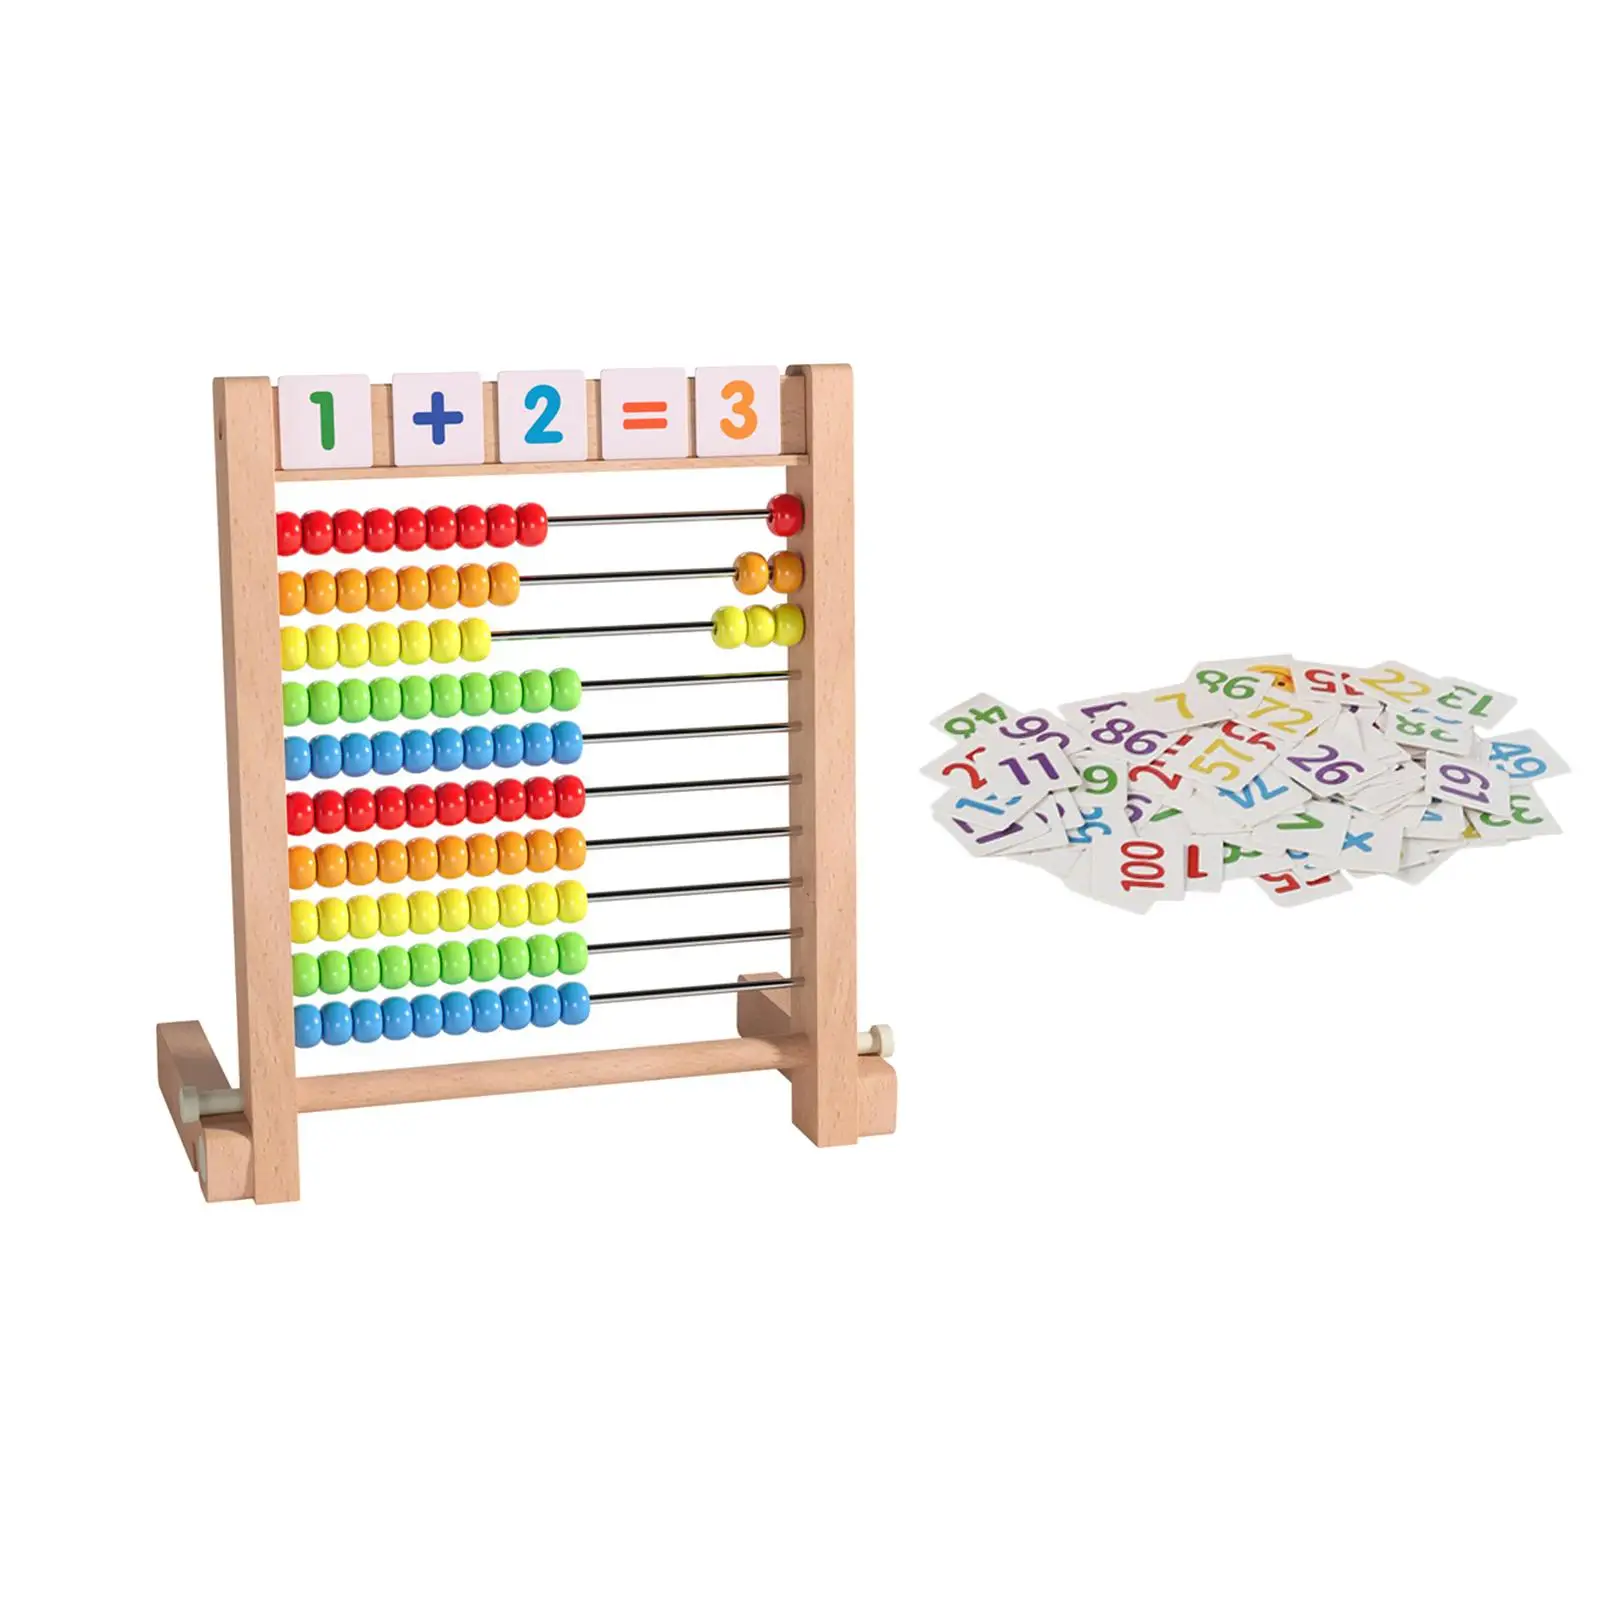 Classic Wooden Abacus Ten Frame Set Calculating Beads Toys Educational Counting Toy for Boy Girls Kids Toddlers Gifts Learning